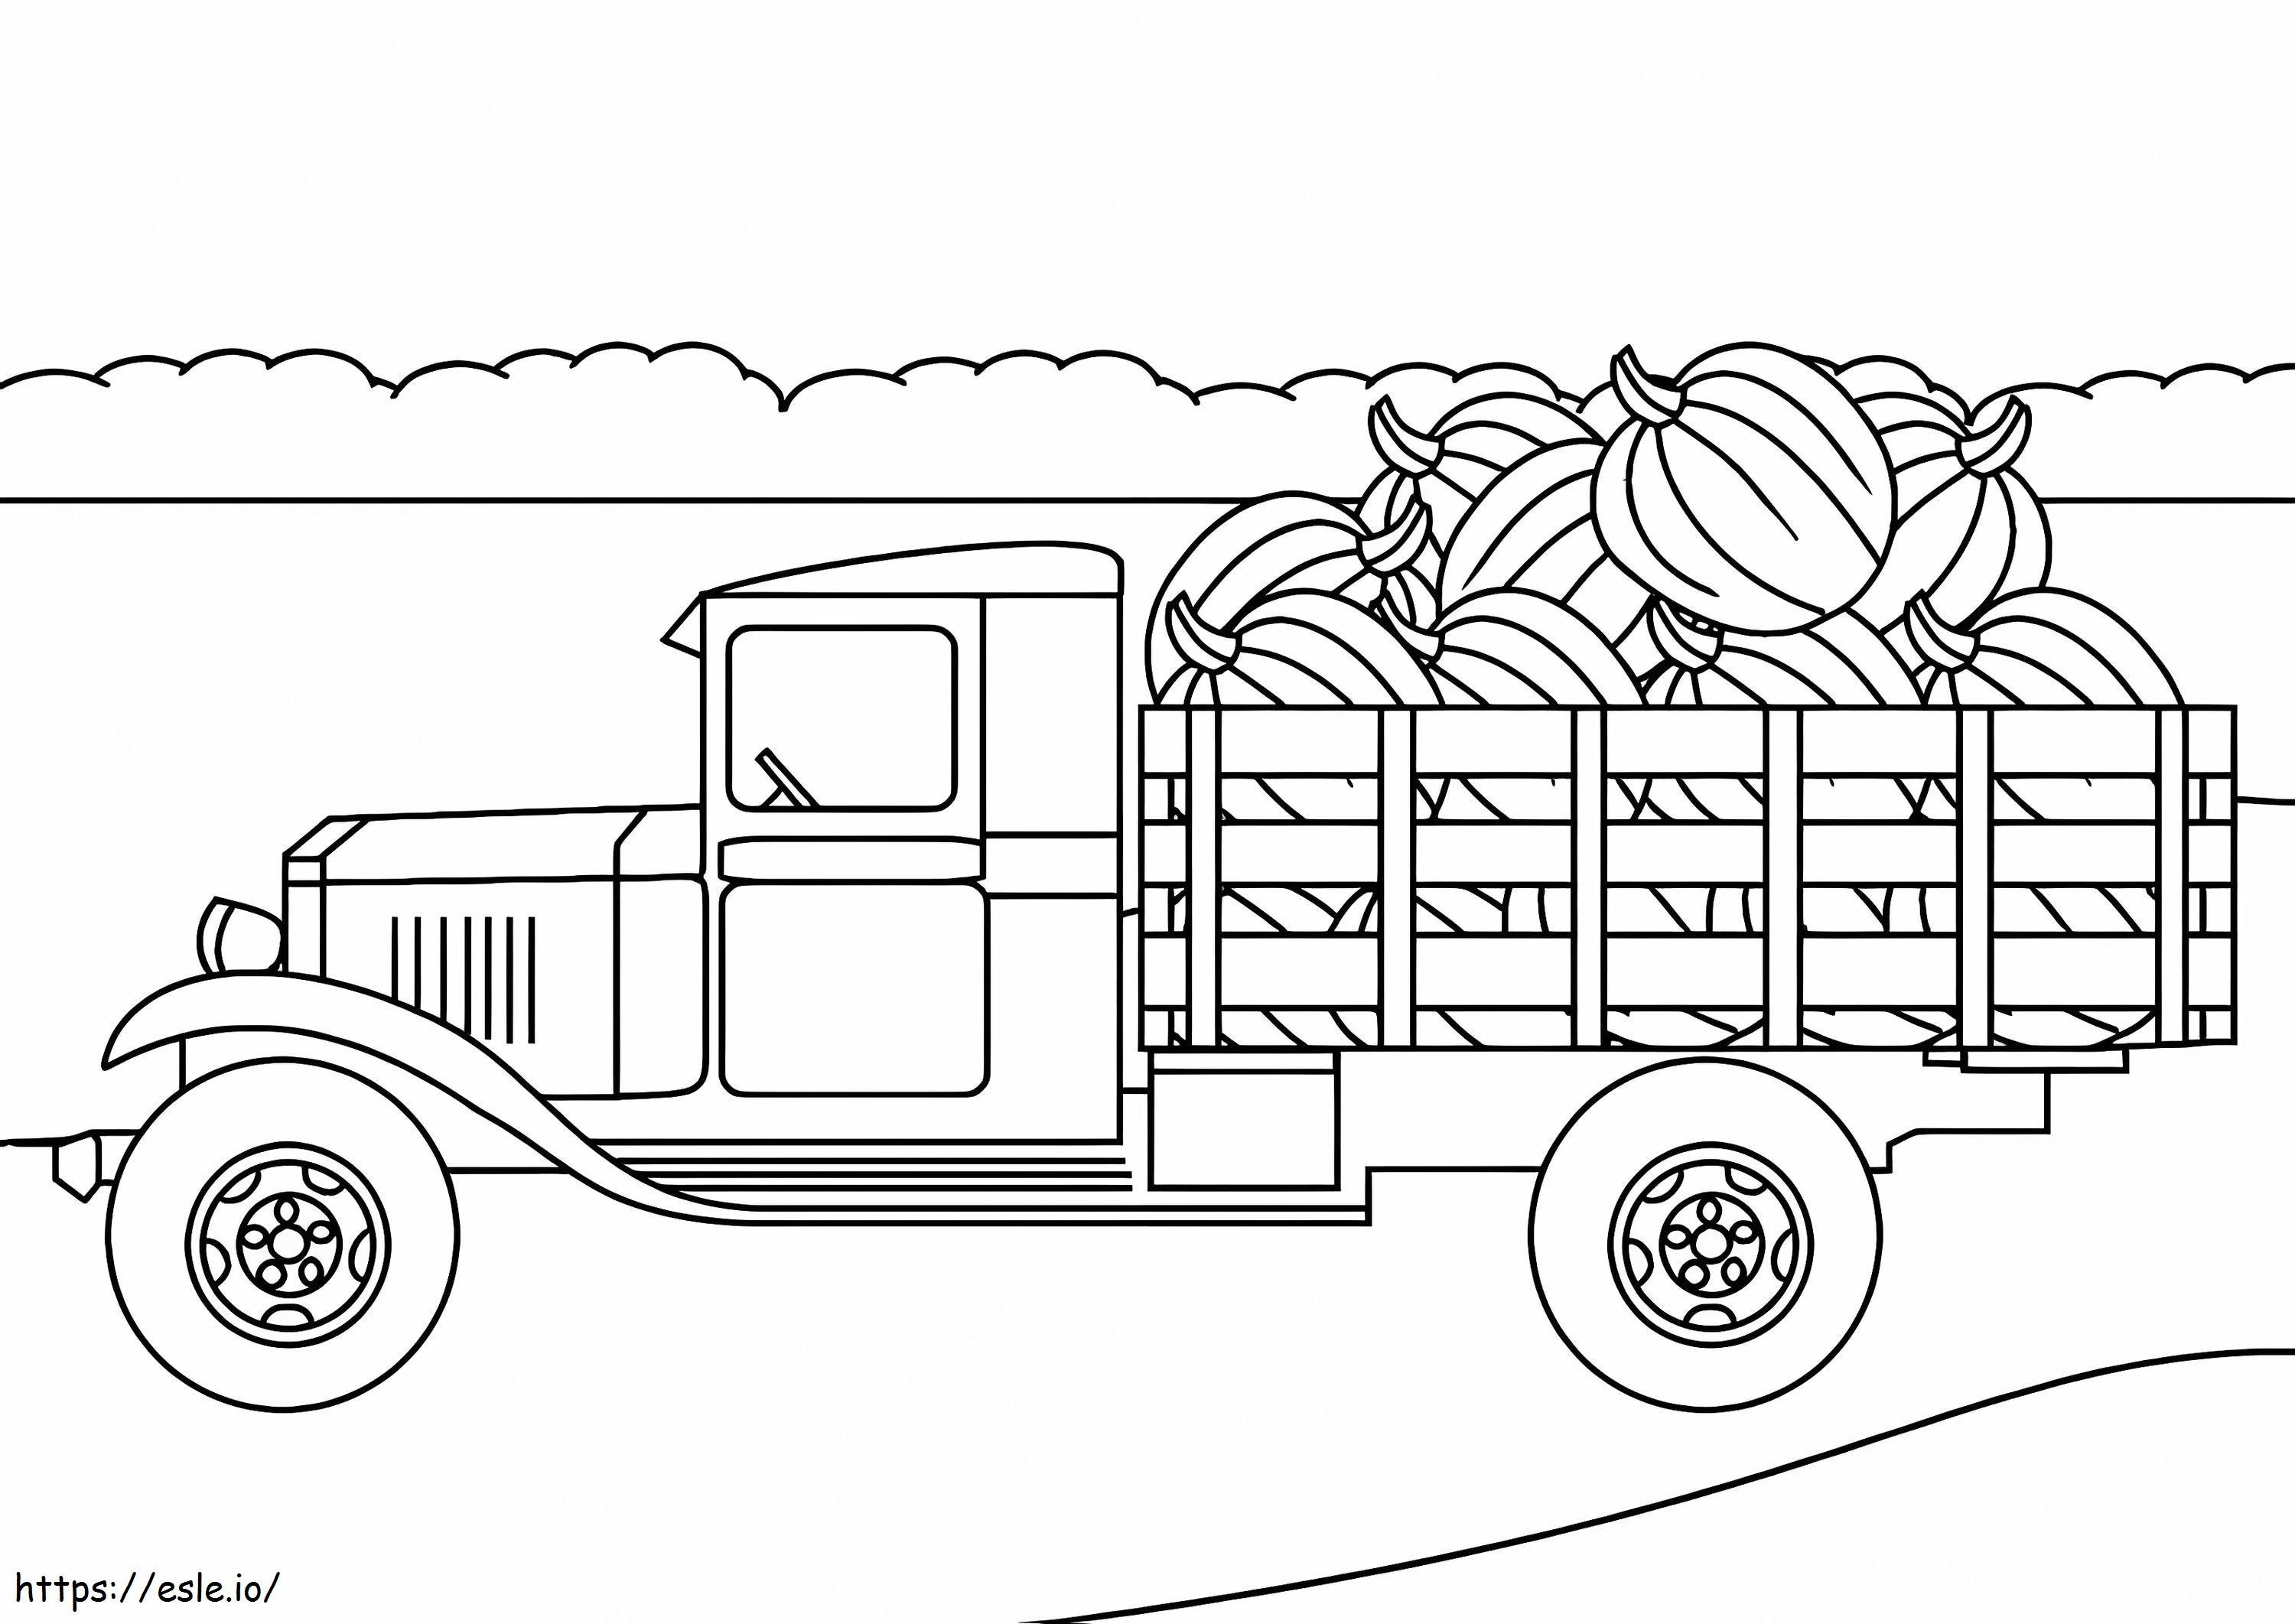 Farm Truck coloring page